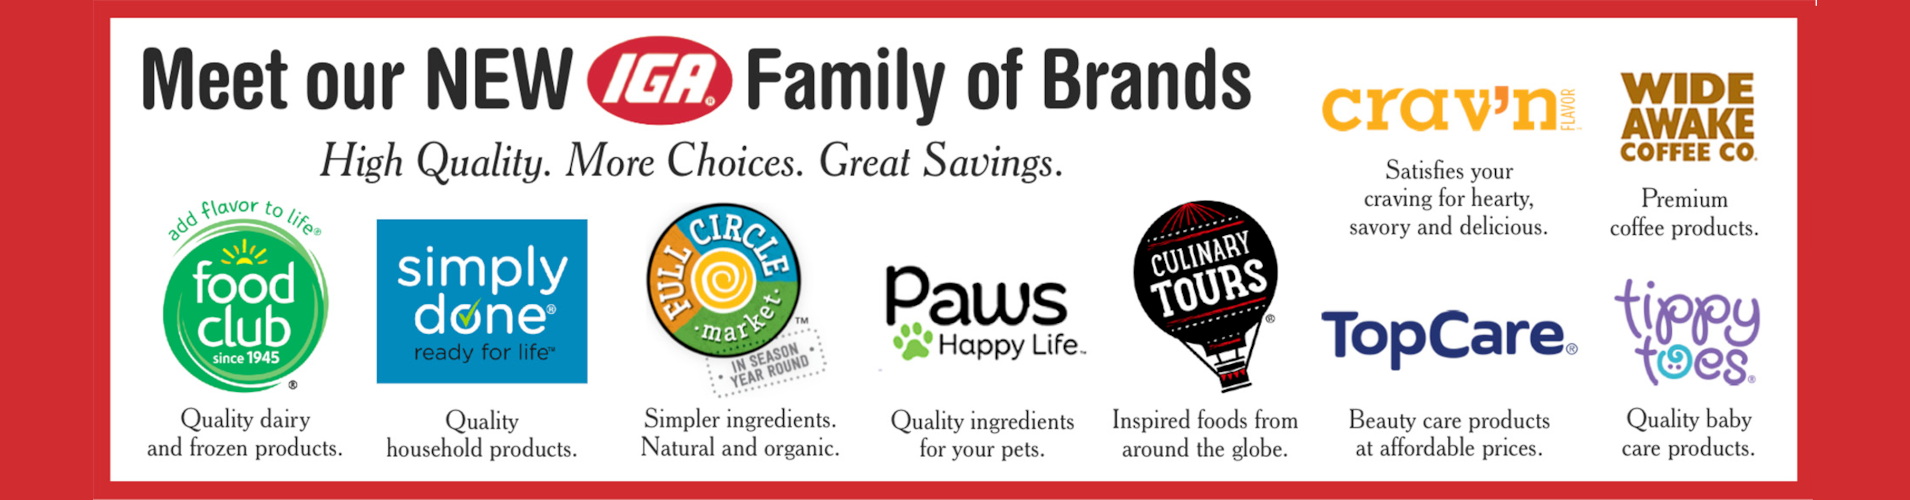 Our new exclusive family of brands